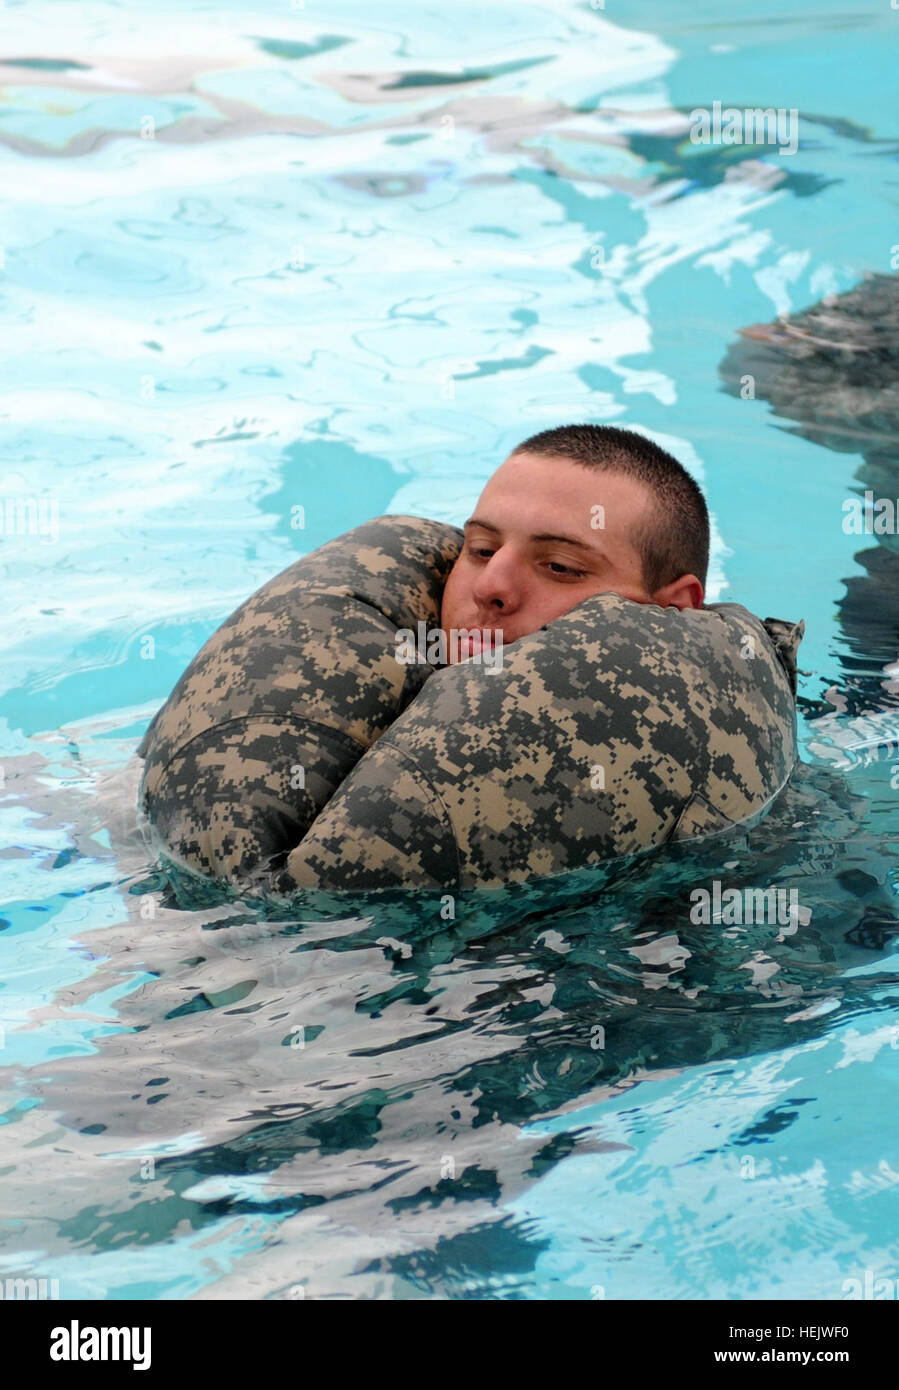 Spc. Alex Muenz, engineer, 336th Engineer Company properly uses his Army Combat Uniform trousers as a flotation device during drown proof training on Fort Hunter Liggett, Calif., Aug. 6. This technique allows the soldier to conserve energy in the water by keeping them afloat and not forcing the soldier to tread water. The engineer soldiers are at Fort Hunter Liggett for their annual training in support of Castle Installation Related Construction. Soldiers splash into safety 441730 Stock Photo